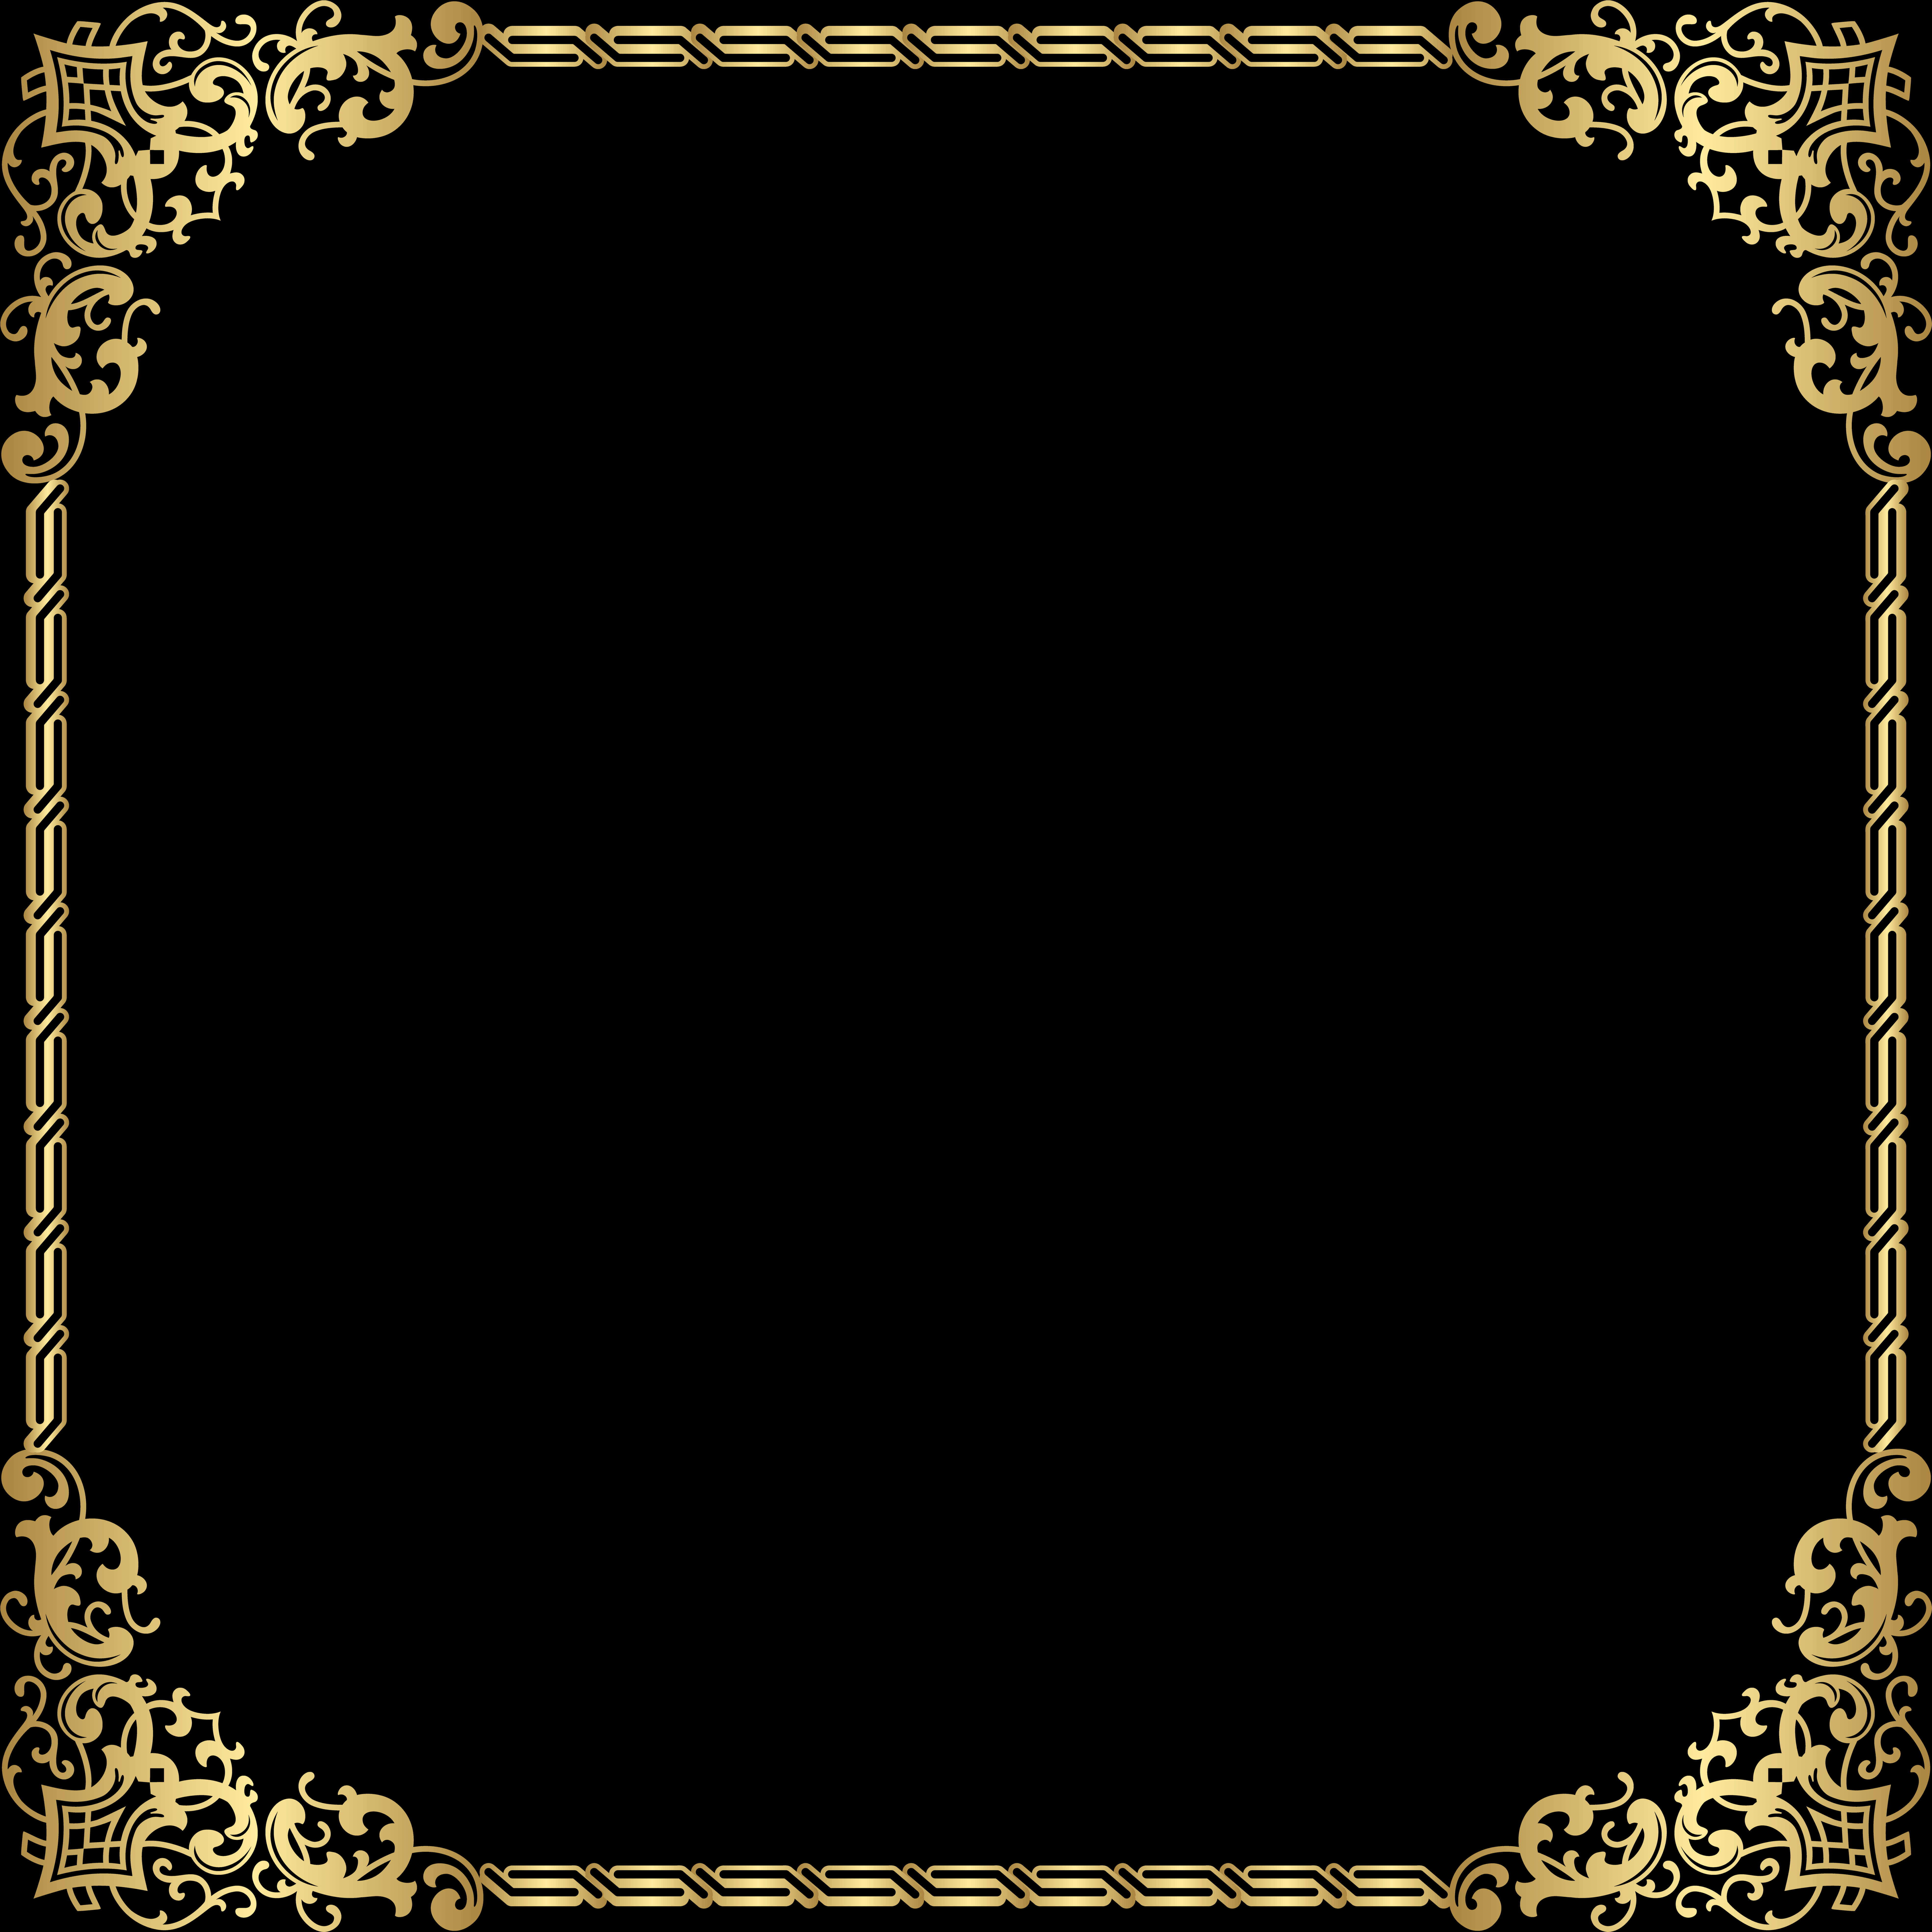 A Gold Frame With Black Background